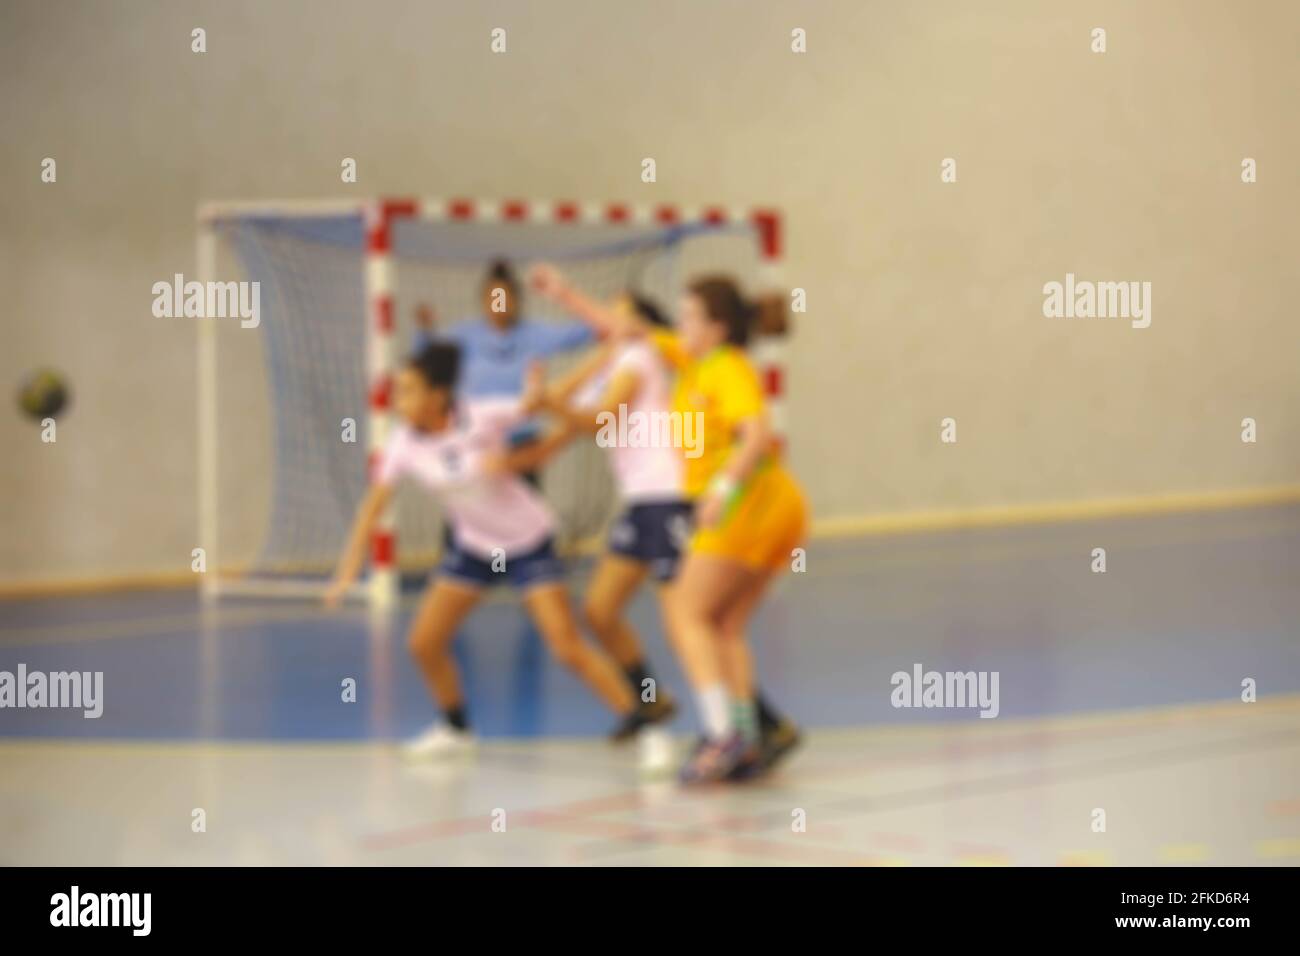 Blurred image of women handball players in action Stock Photo